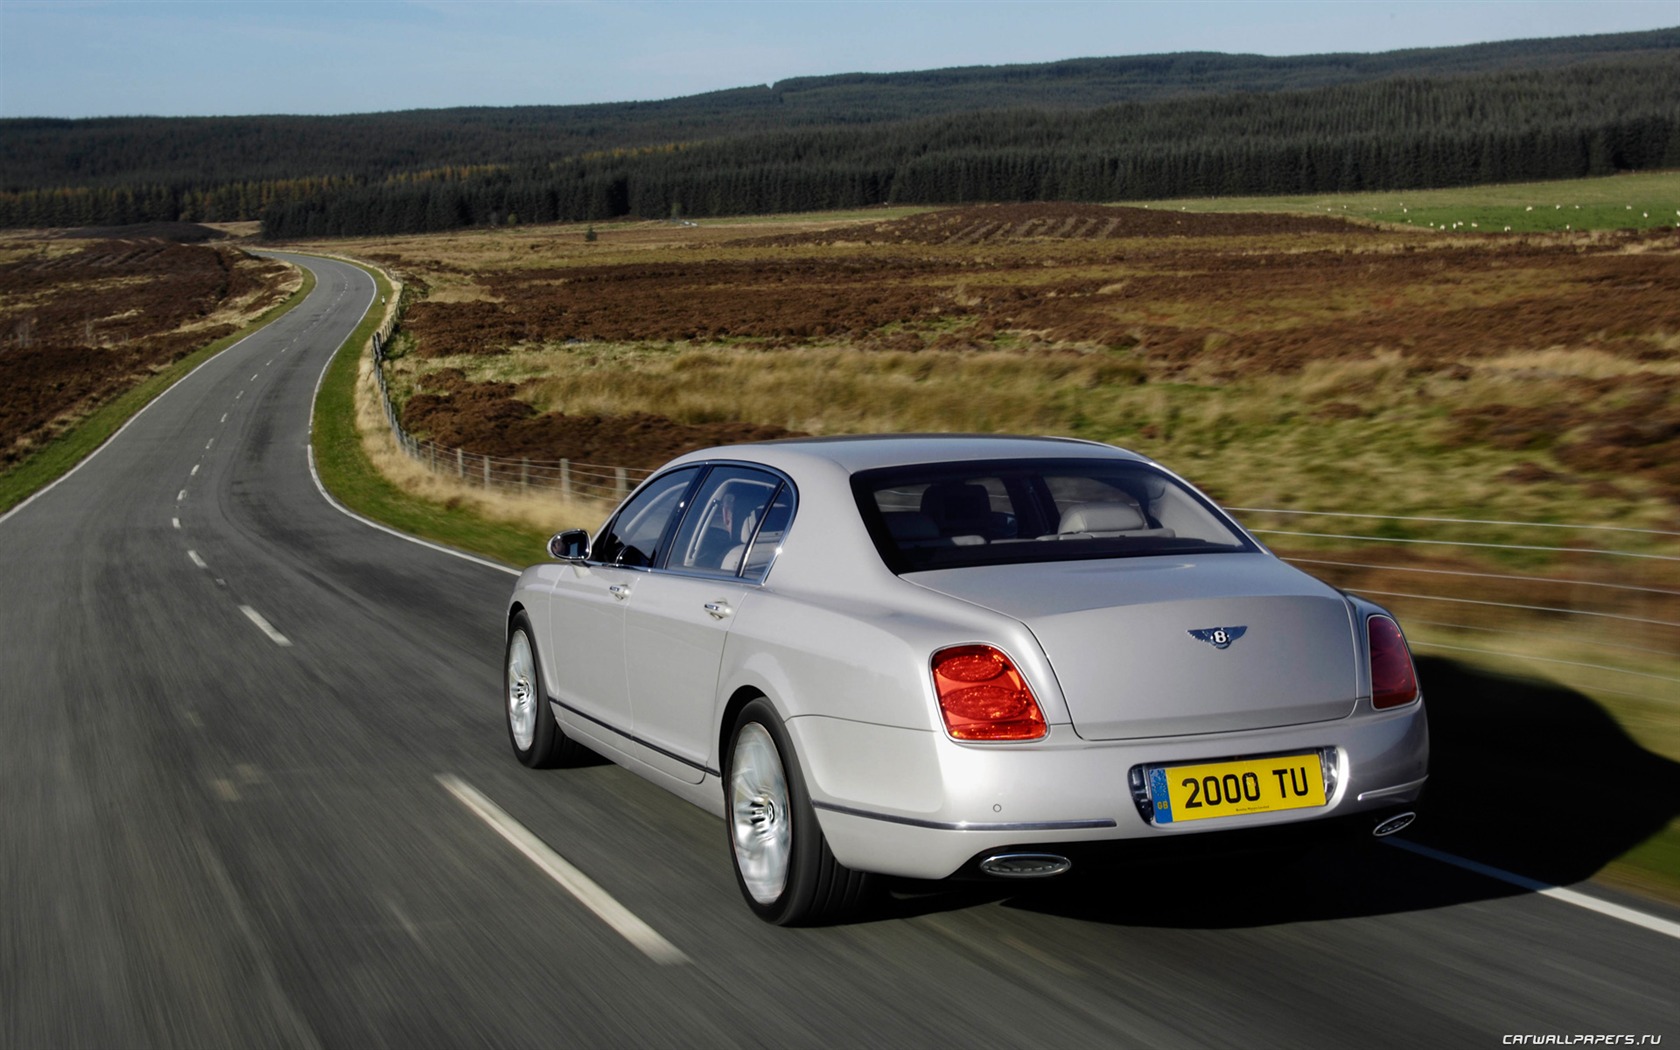 Bentley Continental Flying Spur Speed - 2008 賓利 #4 - 1680x1050